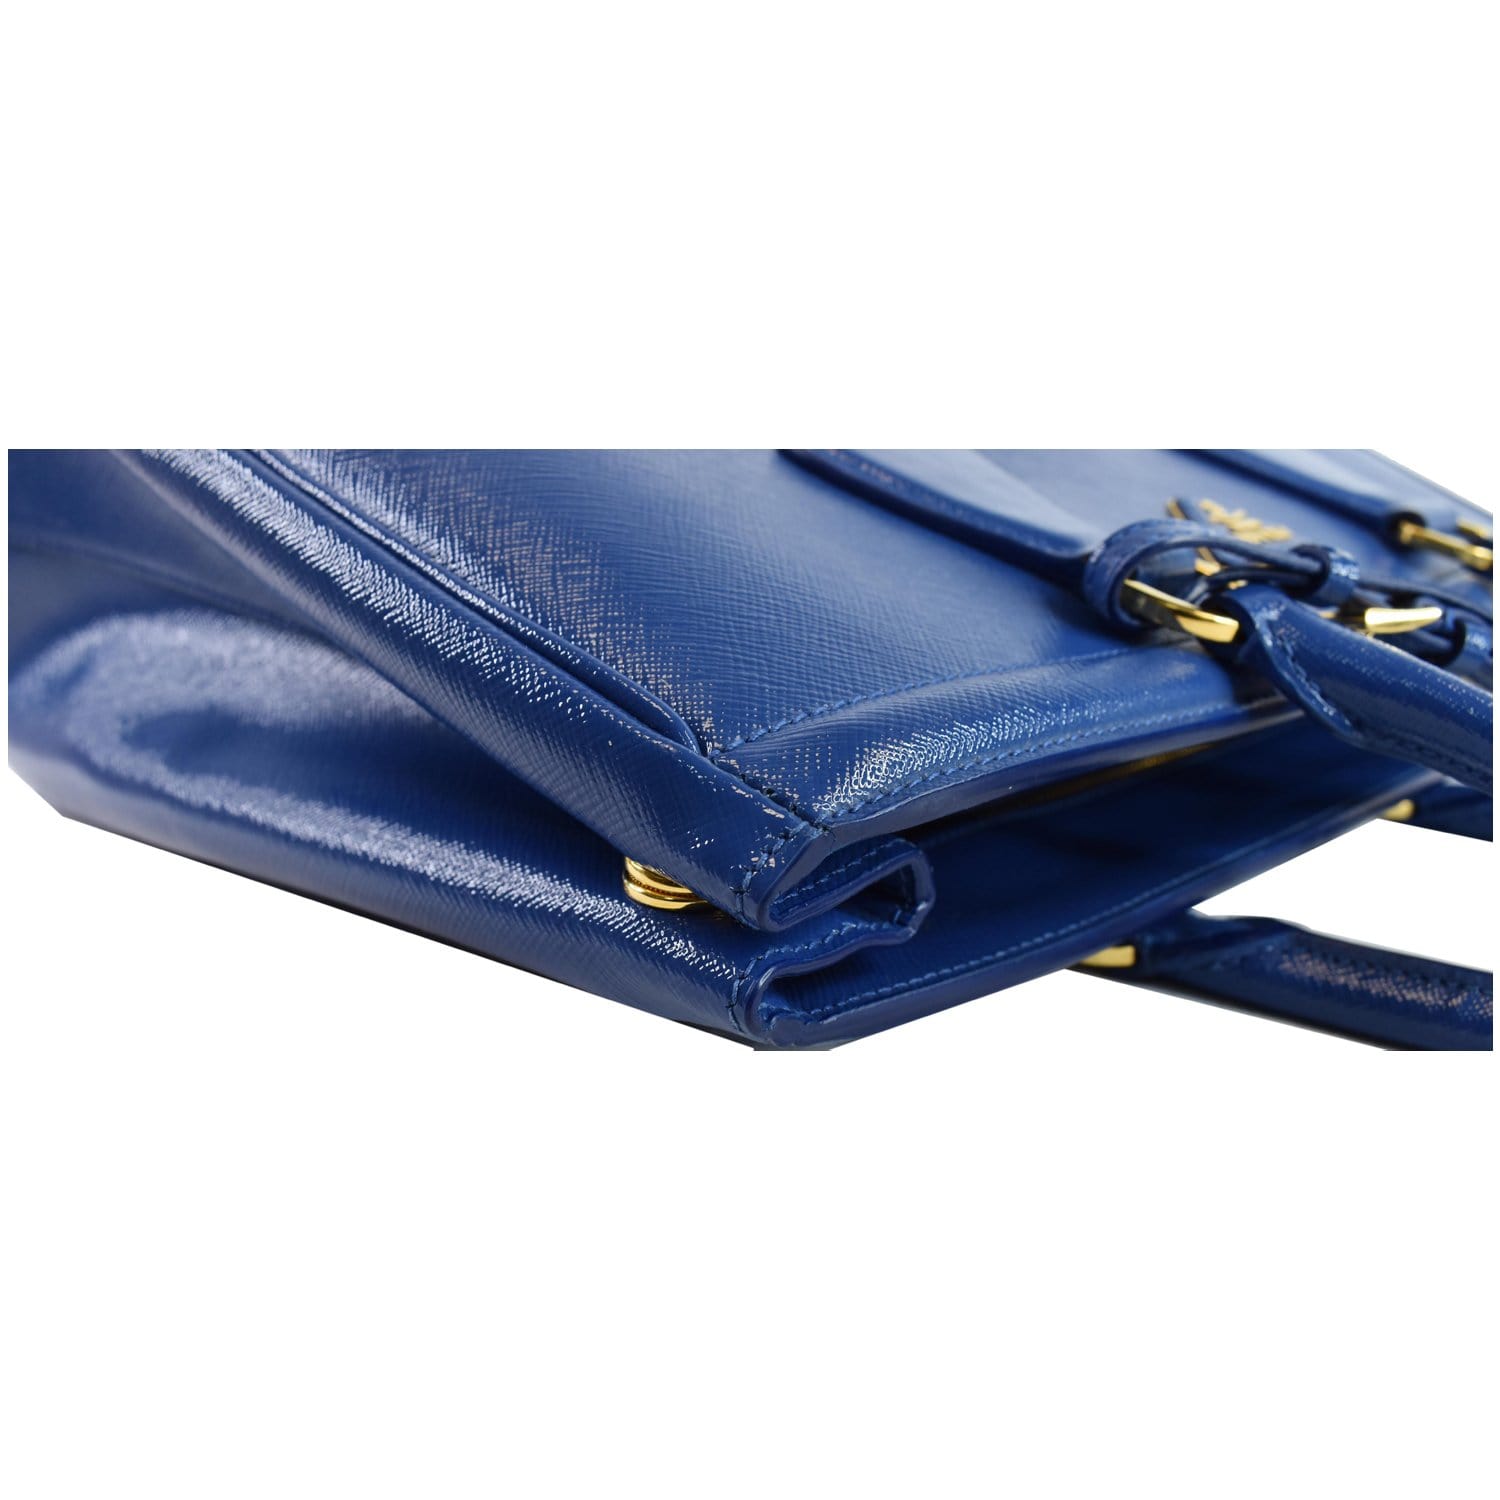 Prada Blue Saffiano Lux Bow Wallet On Strap Leather Pony-style